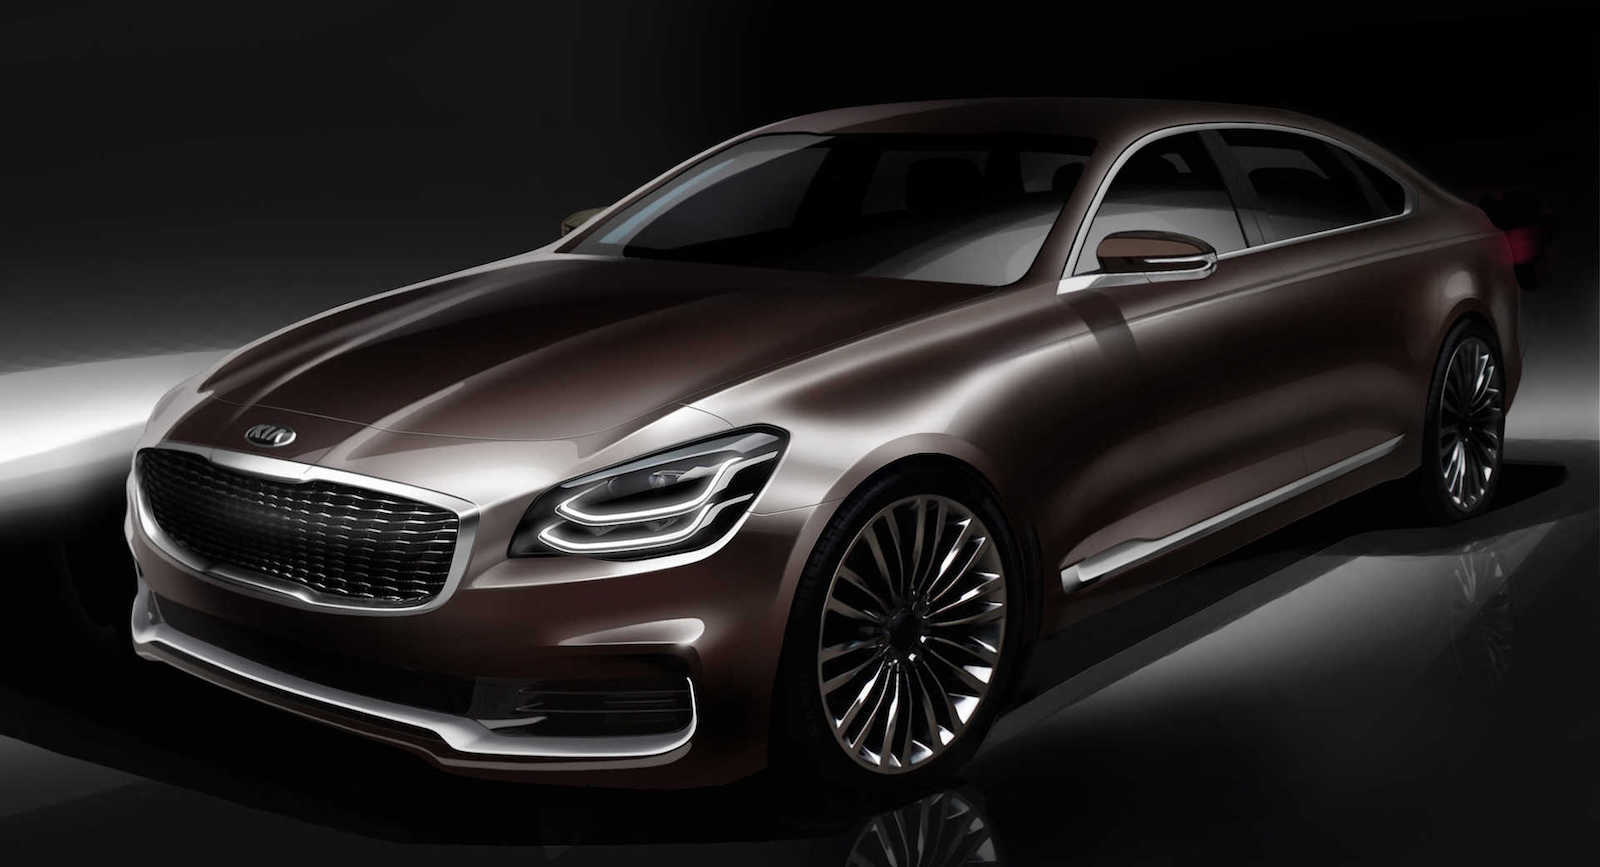 2019 Kia K900 Interior Sketched Out In Official Teaser